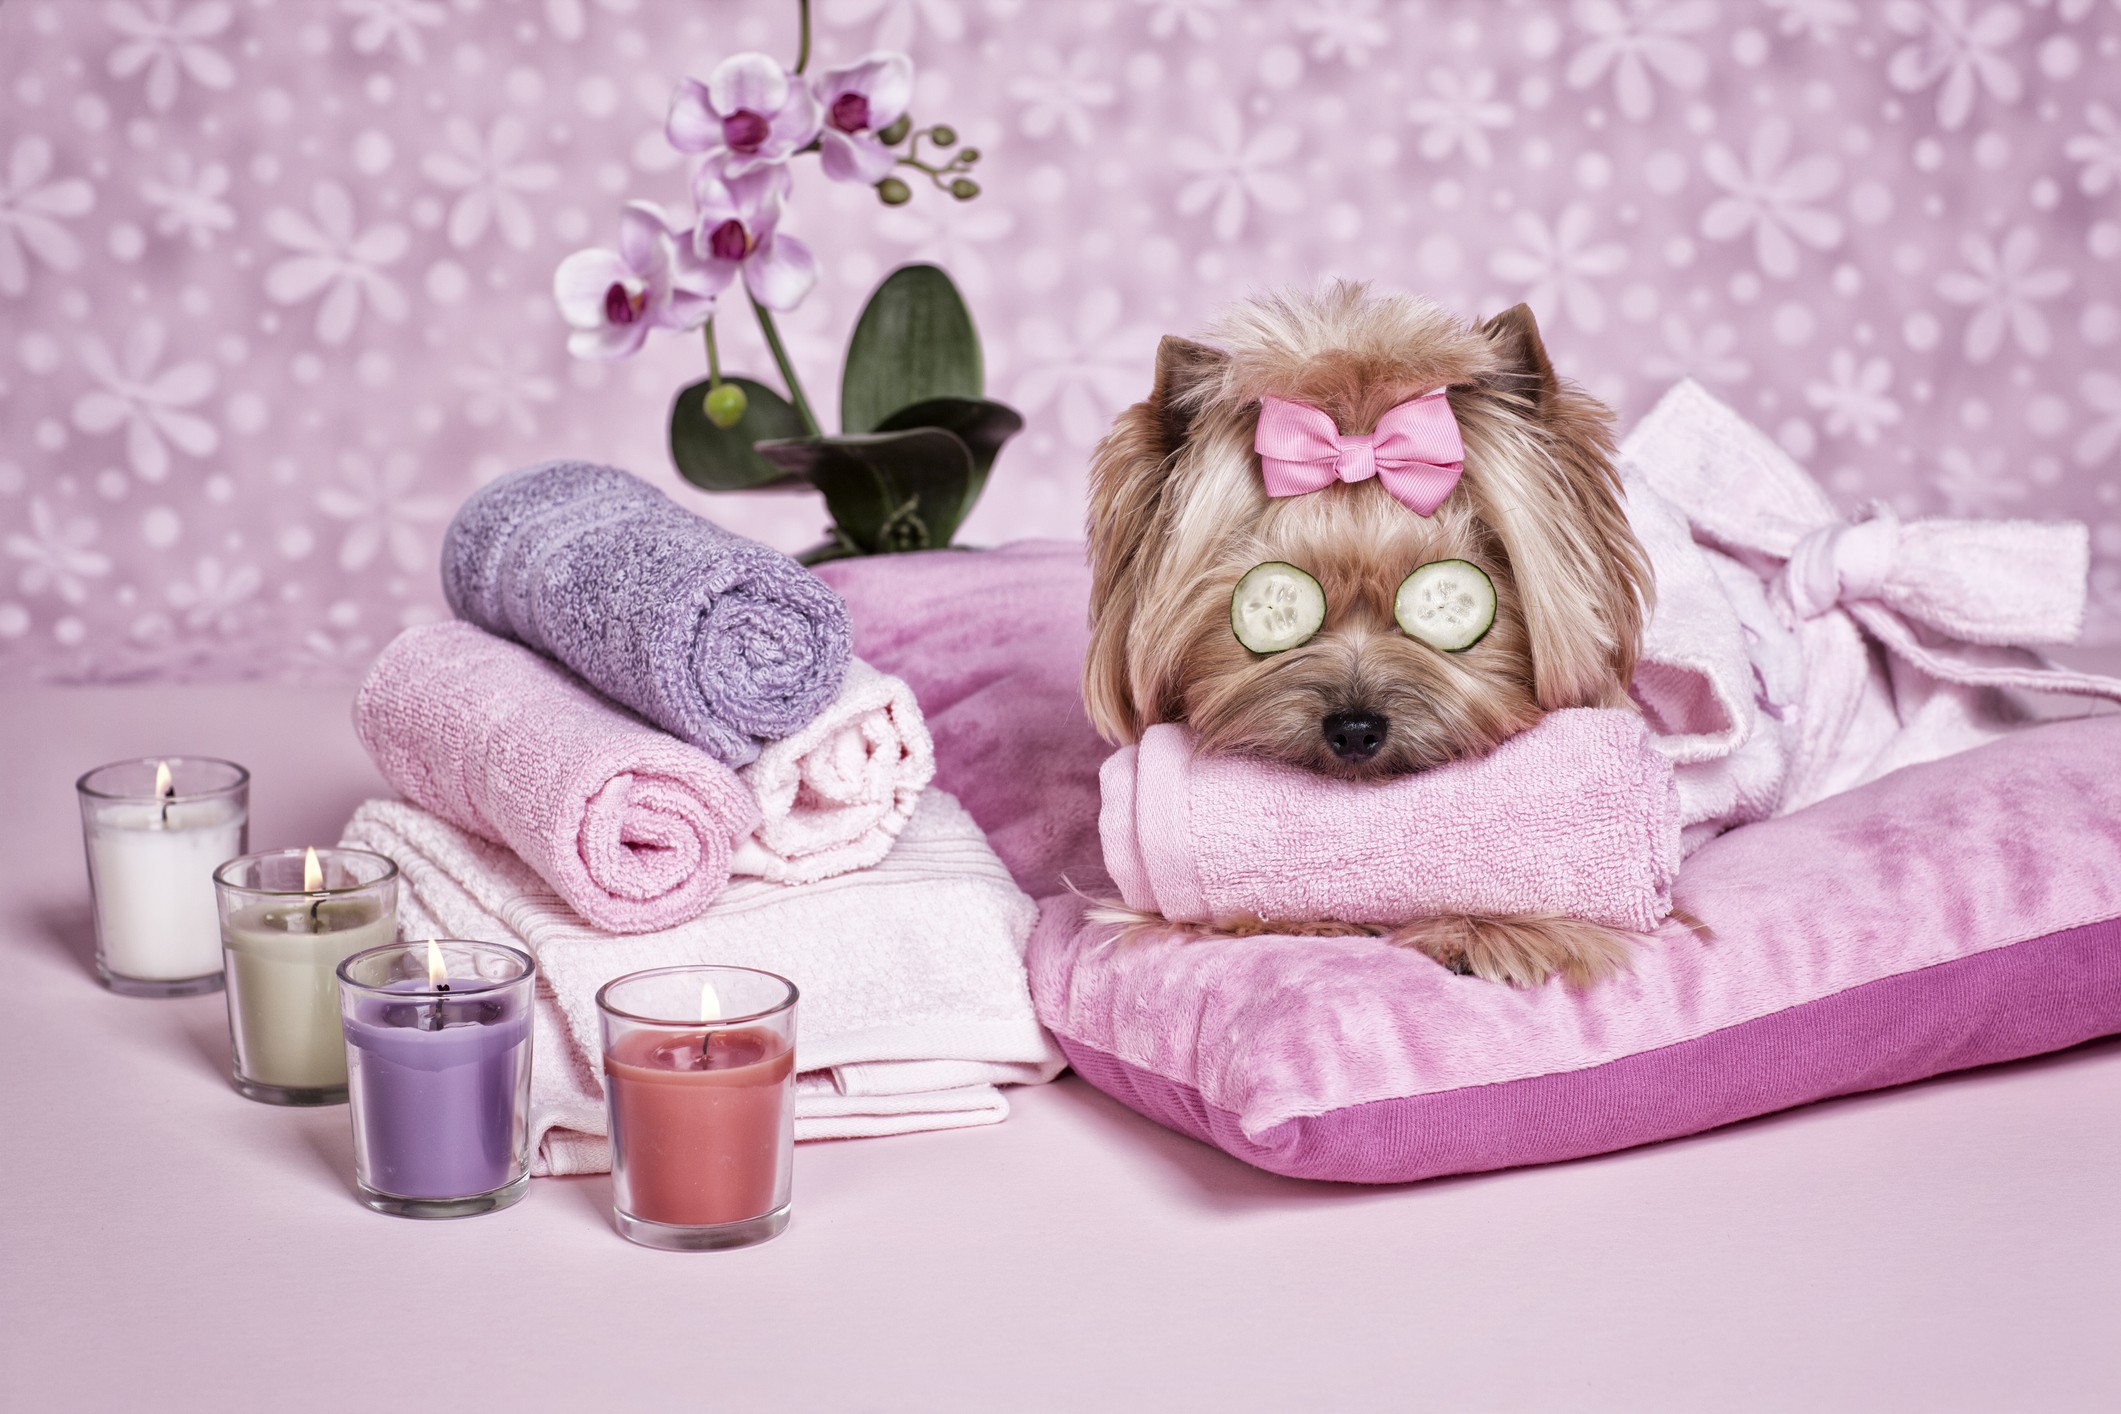 Hotels around the world now offer five-star levels of pampering, including gourmet food and treats and luxury beds for jet-setting pets of animal lovers.